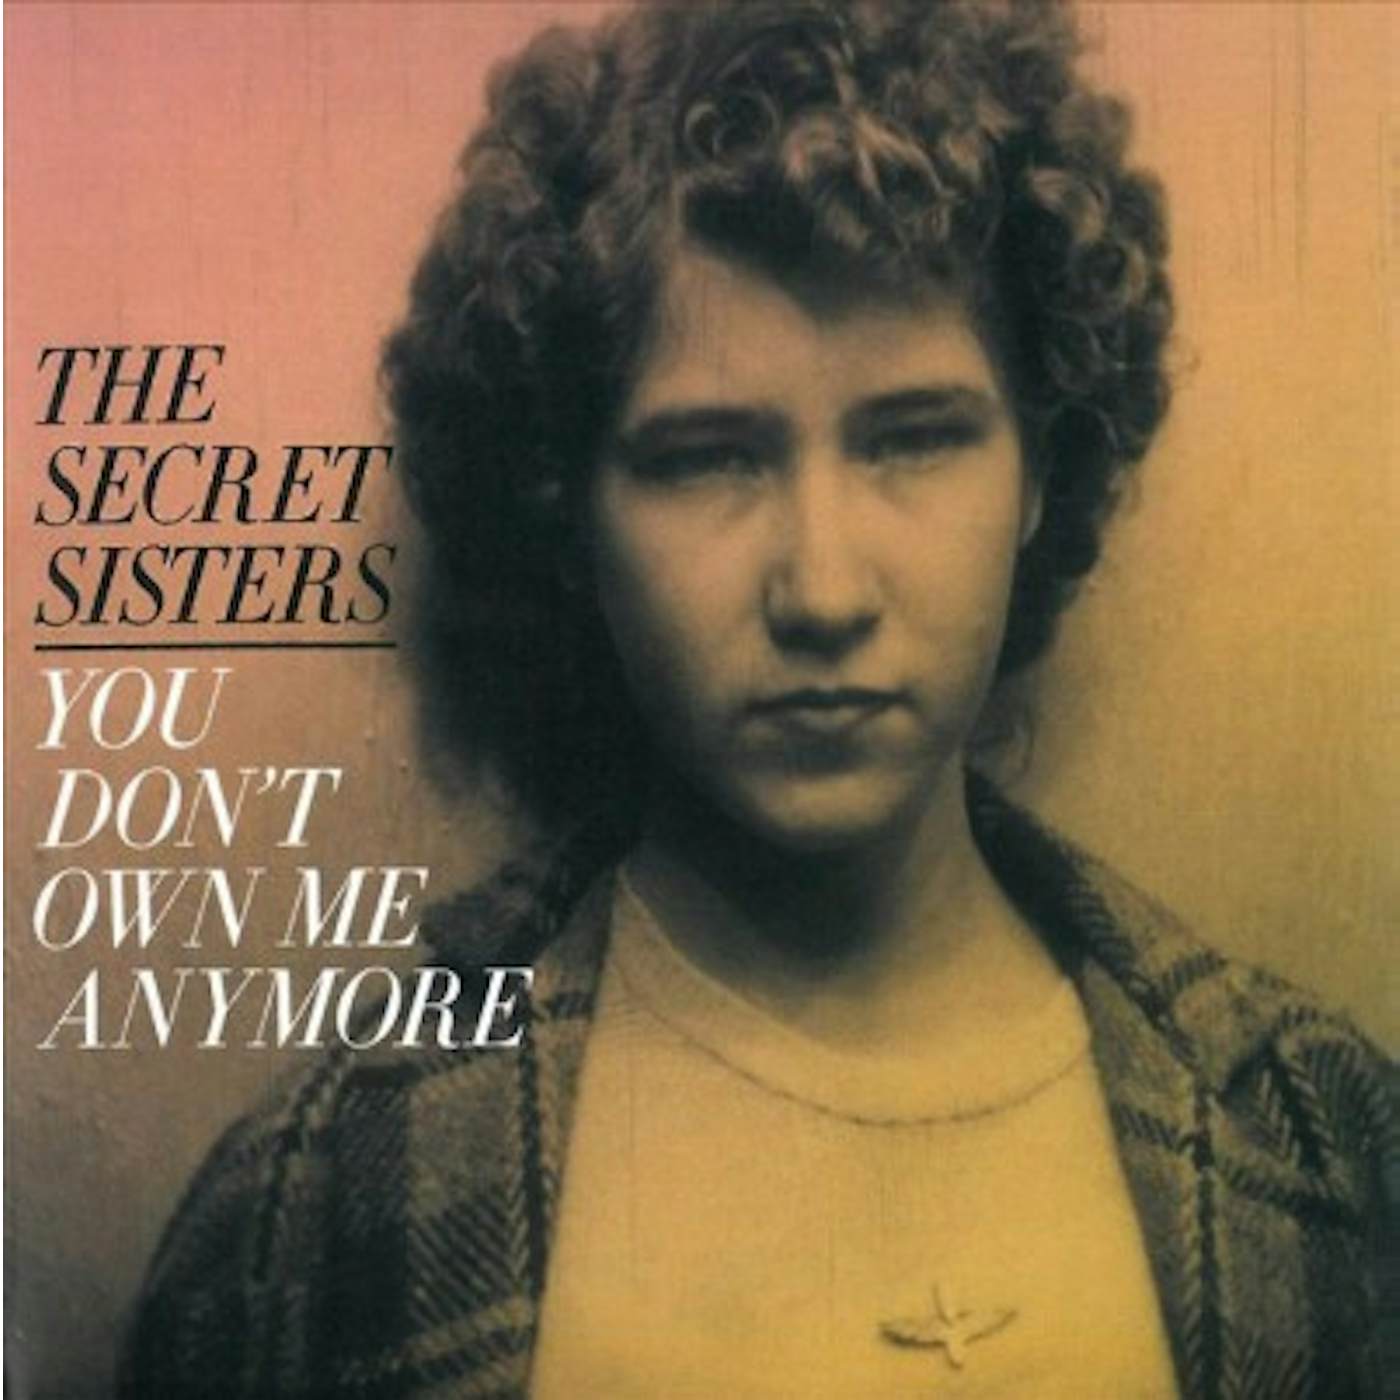 The Secret Sisters YOU DON'T OWN ME ANYMORE CD